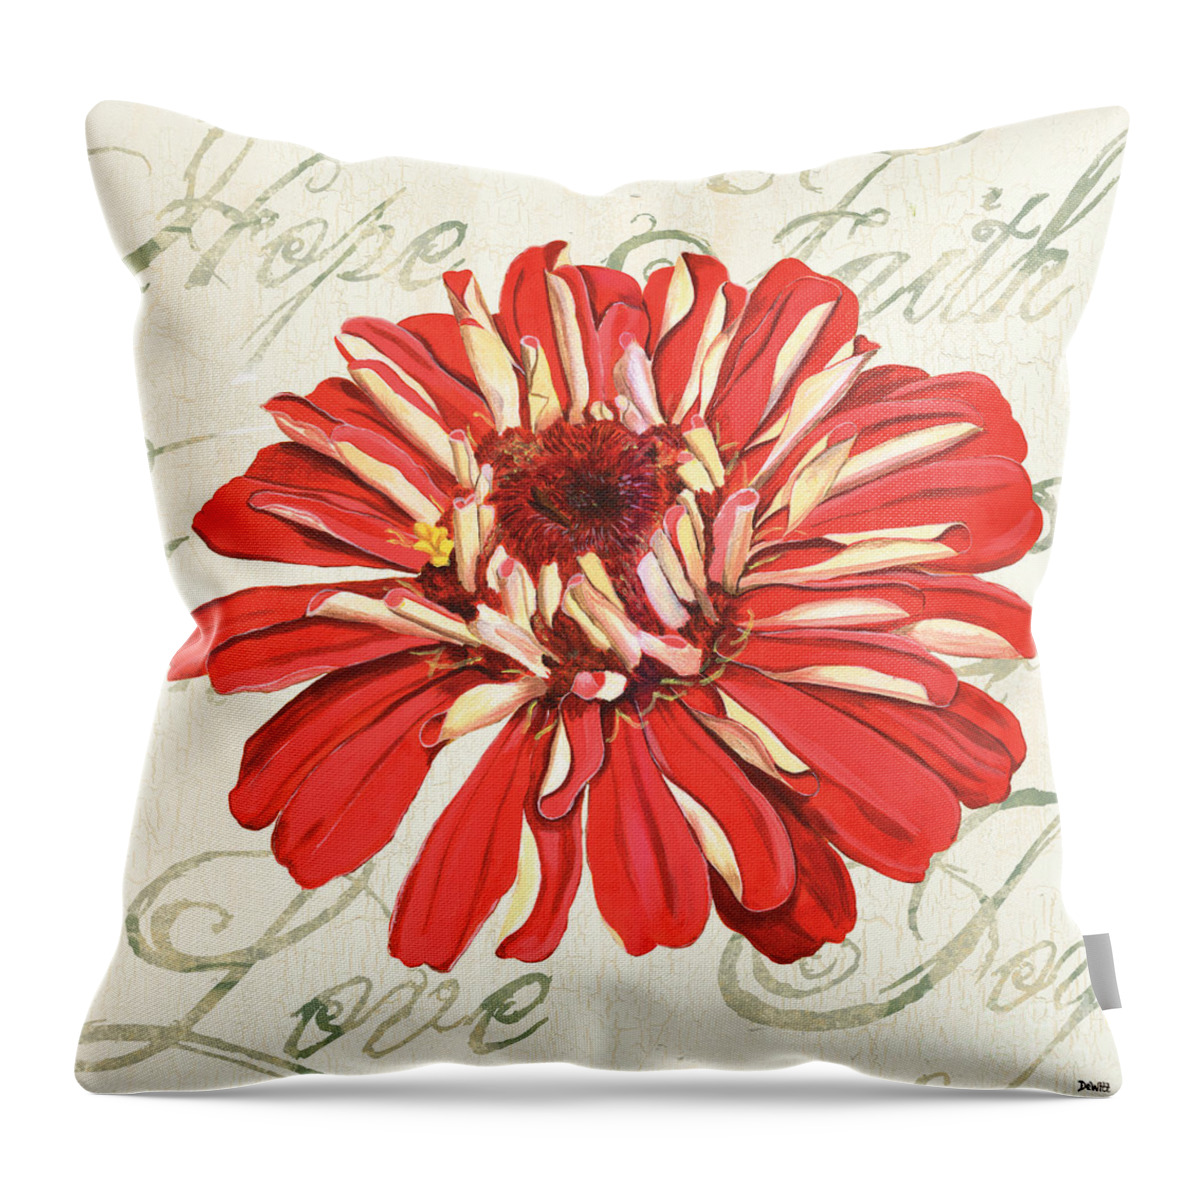 Floral Throw Pillow featuring the painting Floral Inspiration 1 by Debbie DeWitt